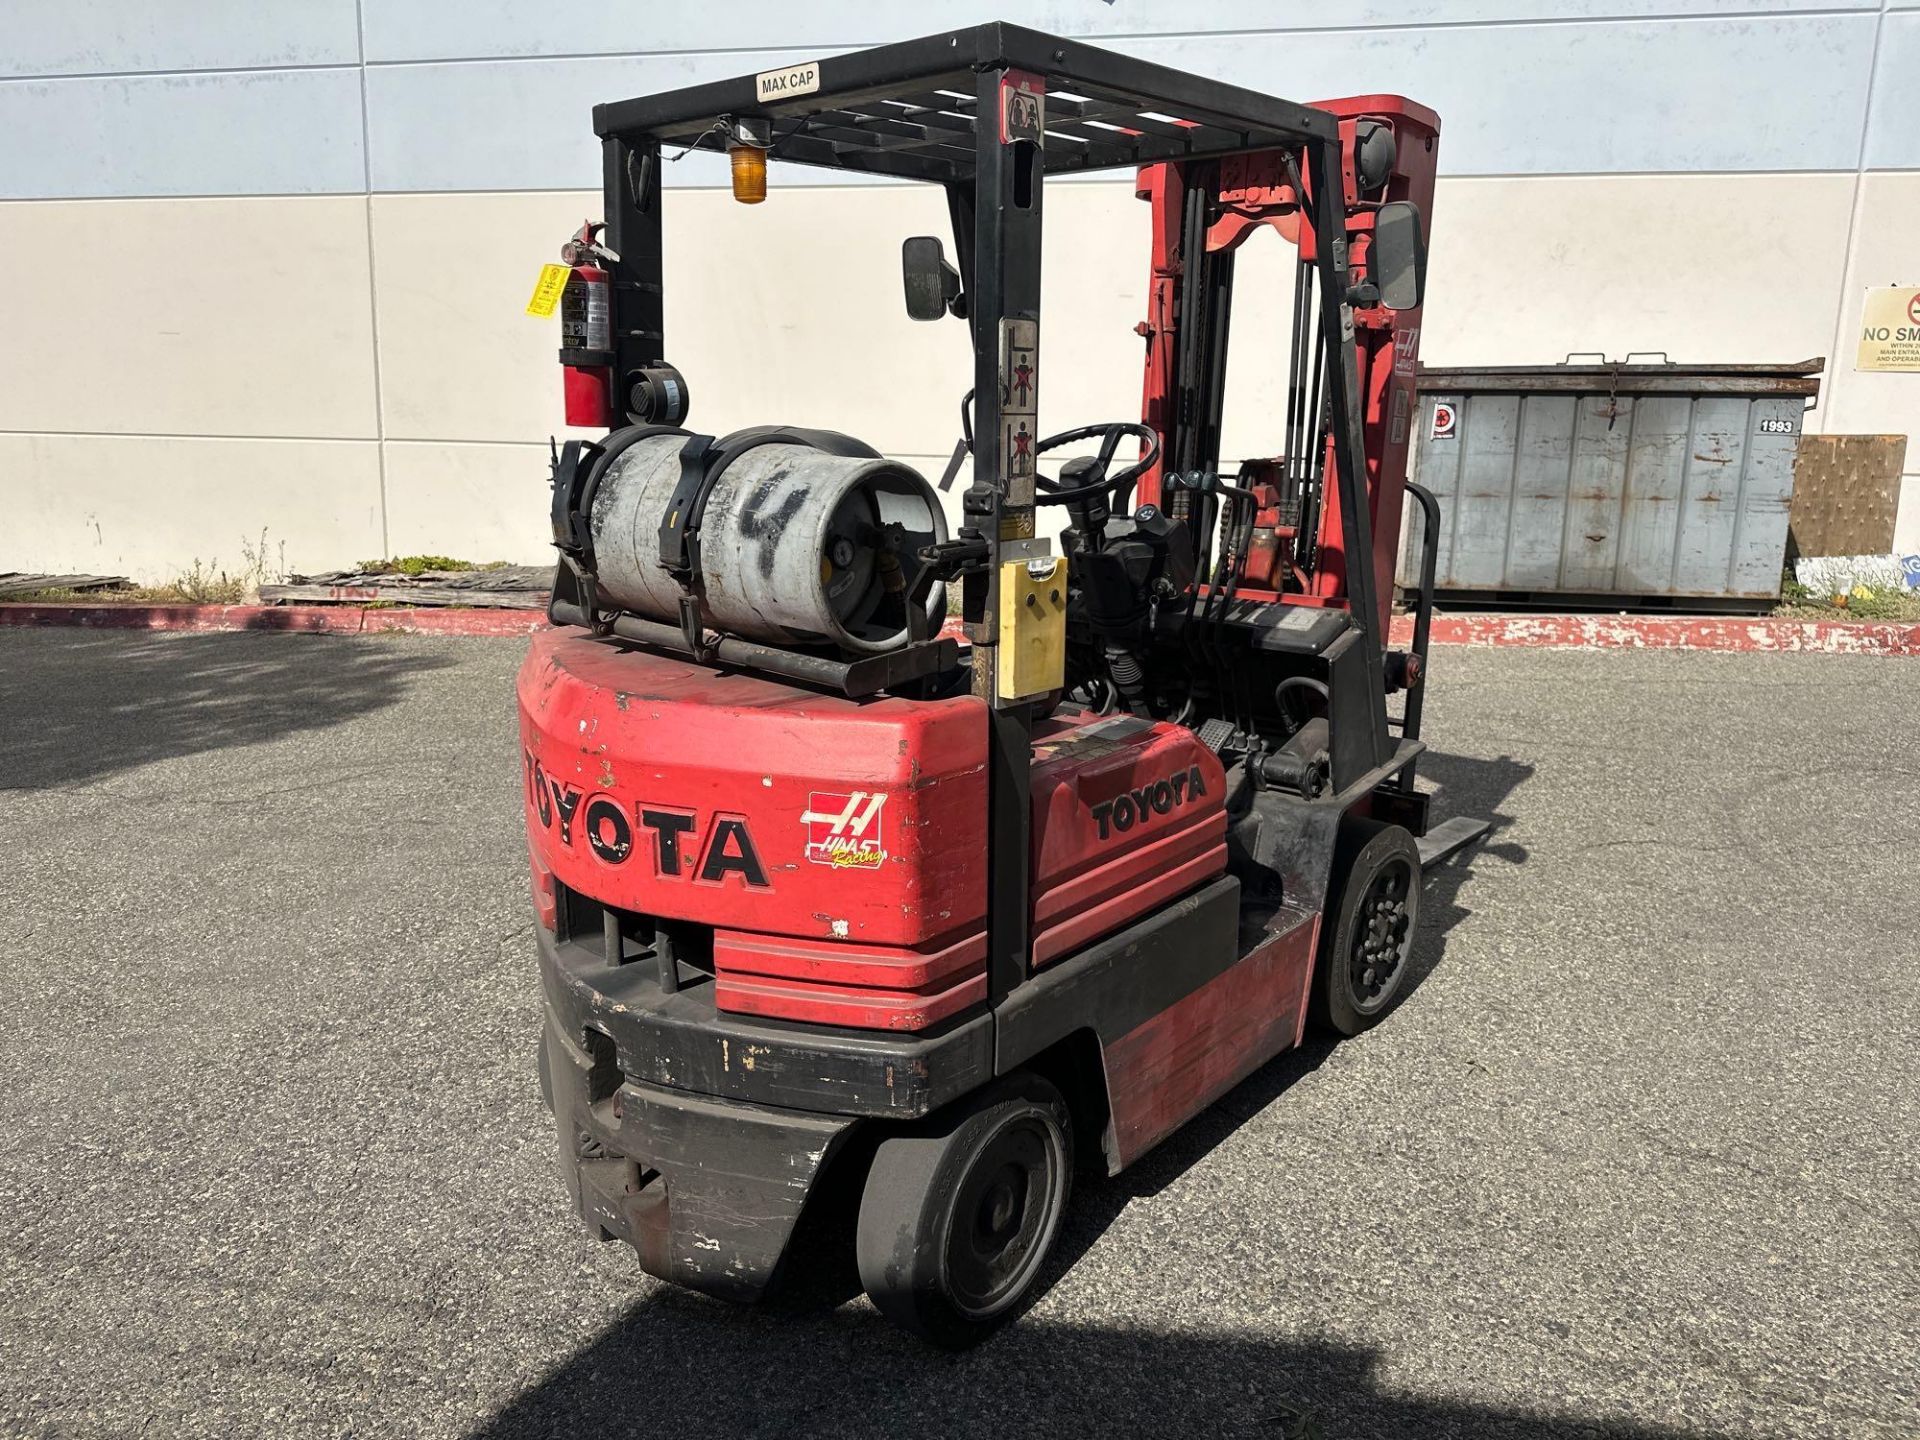 Toyota 5FGC20 LPG Forklift, 3750 Lbs. Cap., s/n 5FCG25-14717 - Image 3 of 7